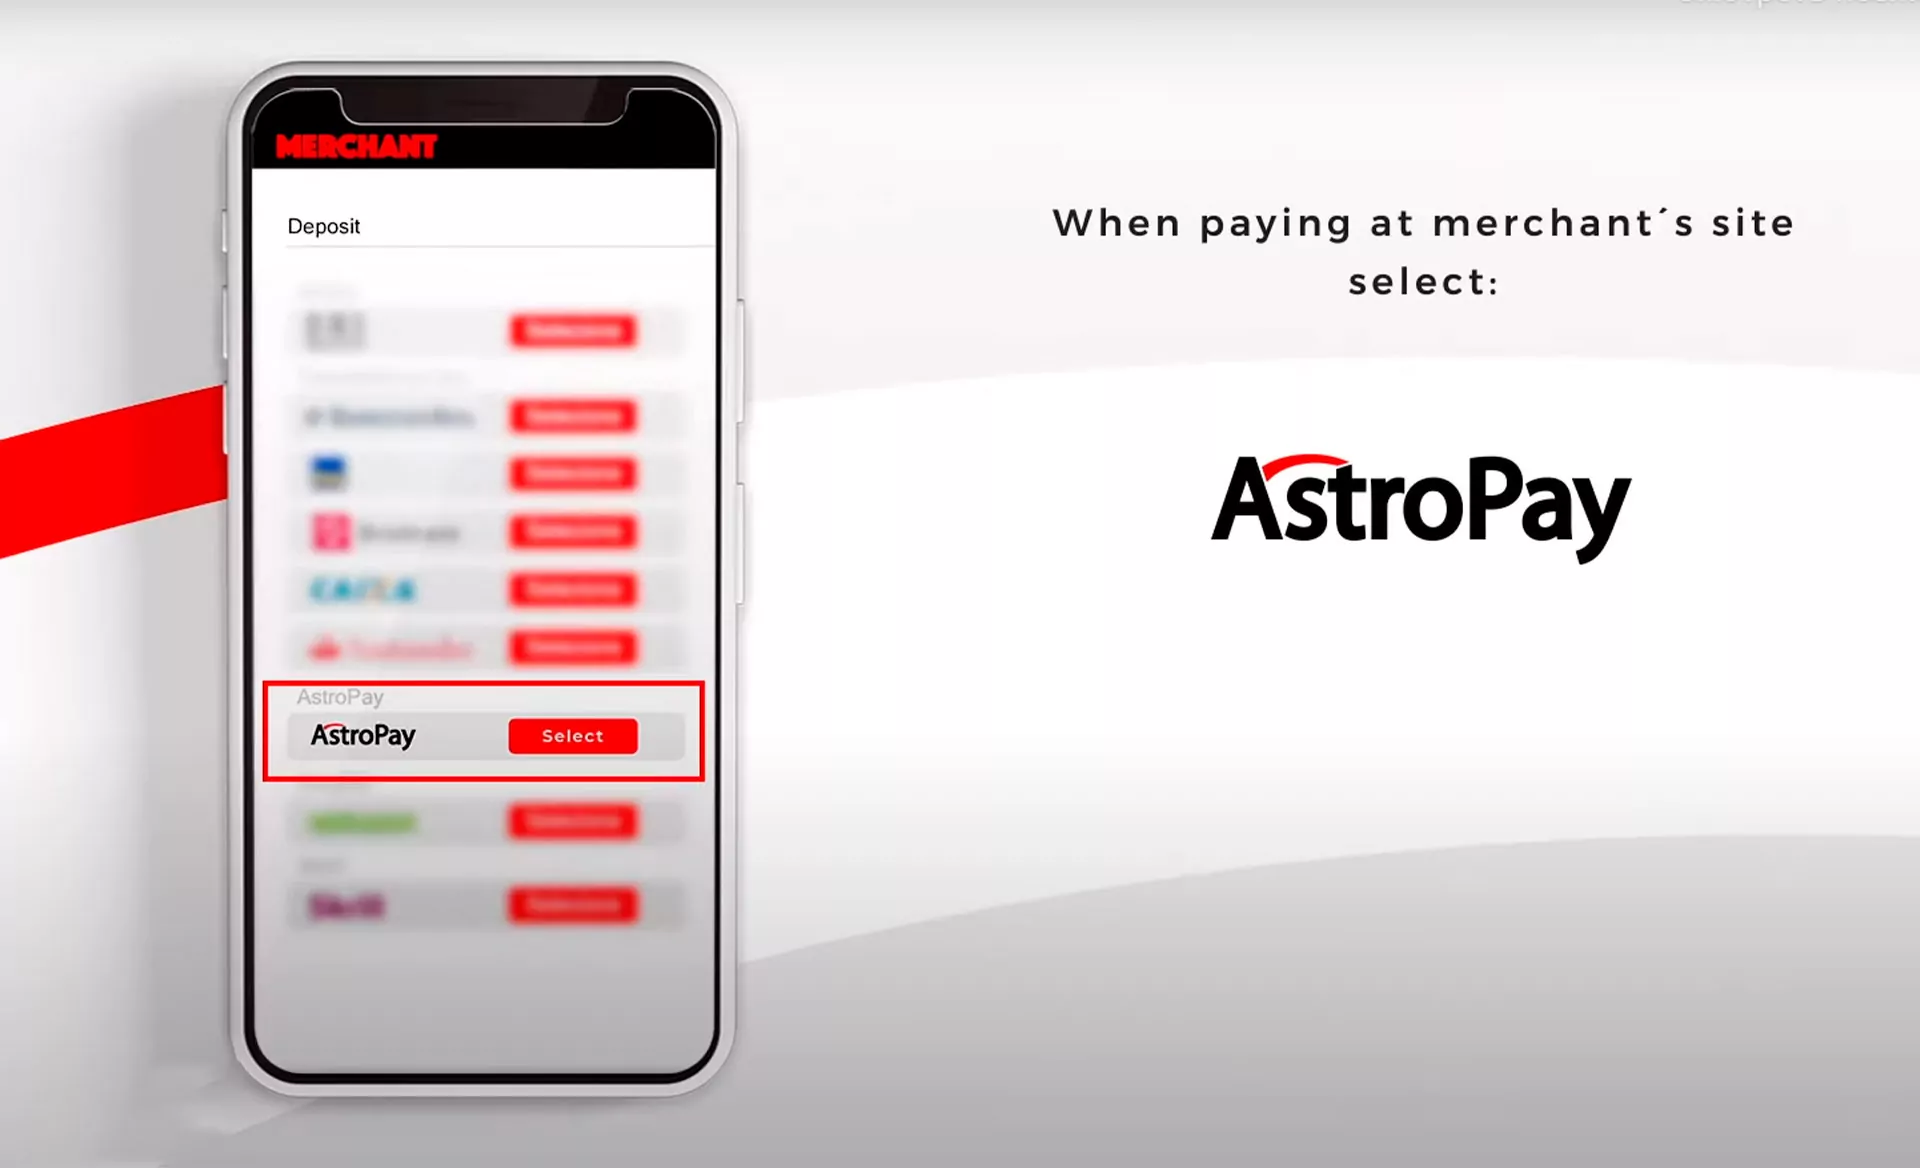 Astropay is available in many popular online casinos in India.